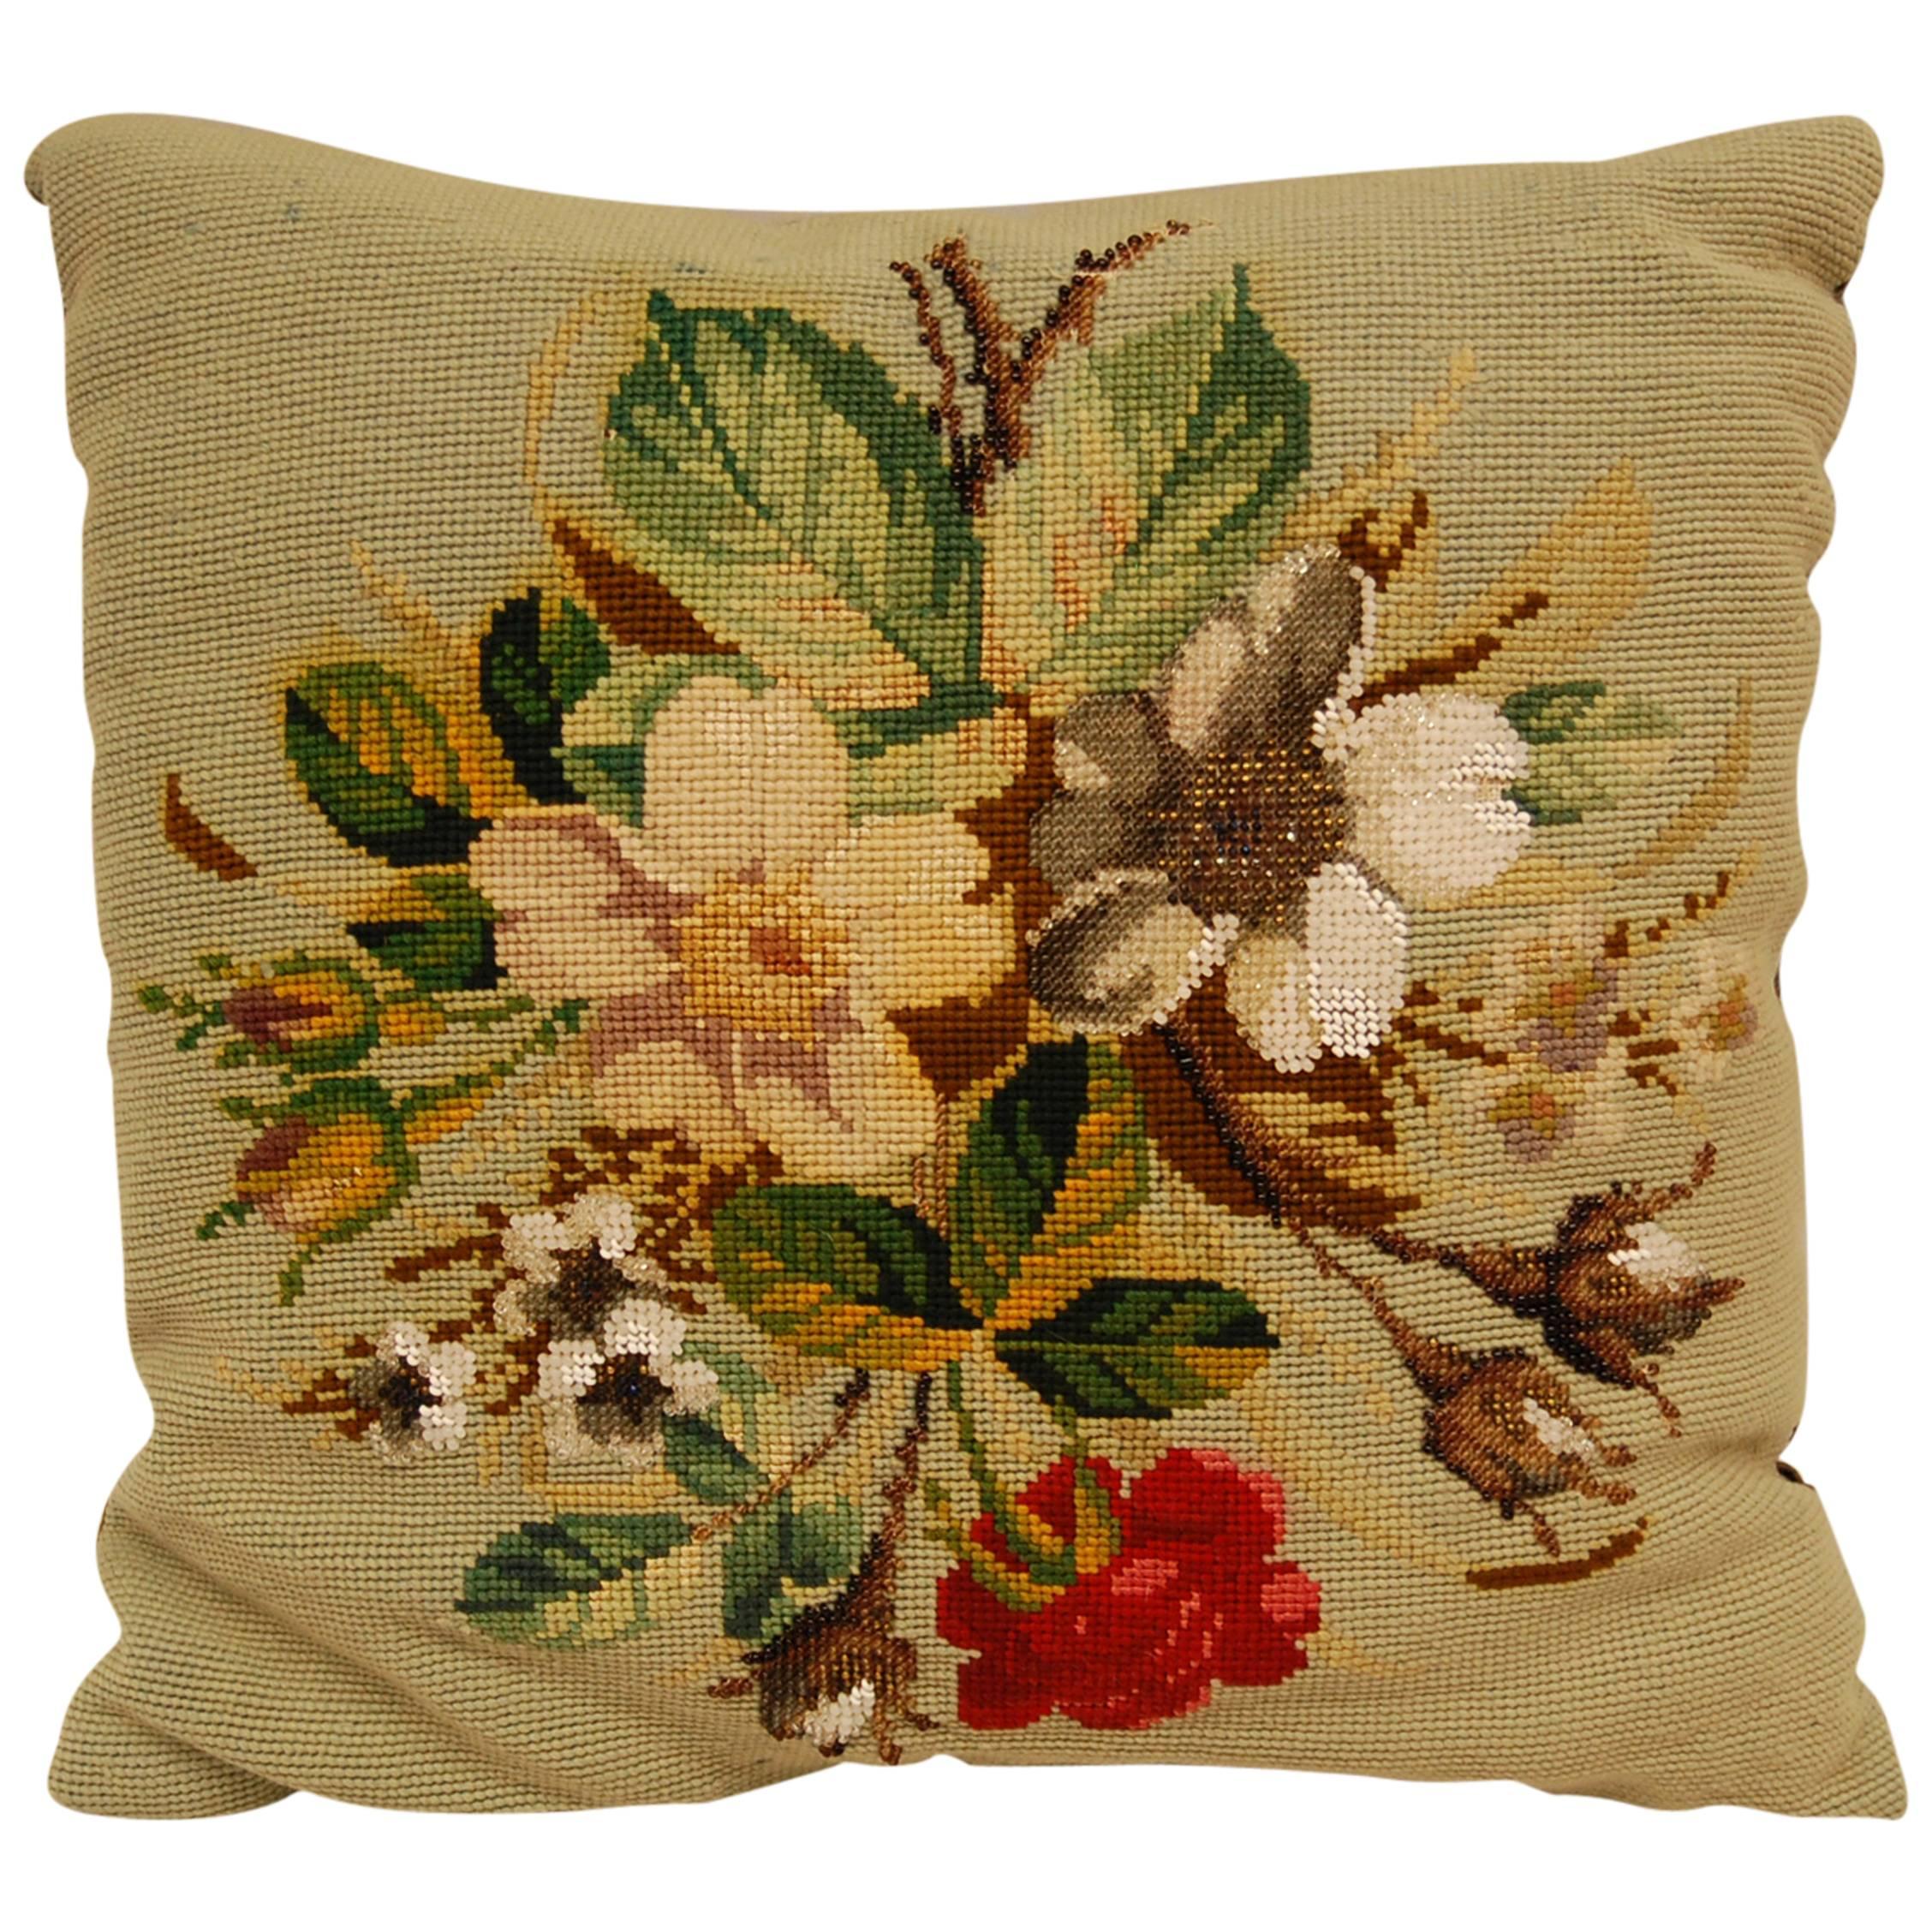 Early 20th Century Pillow with Floral Needlepoint and Glass Beaded Designs